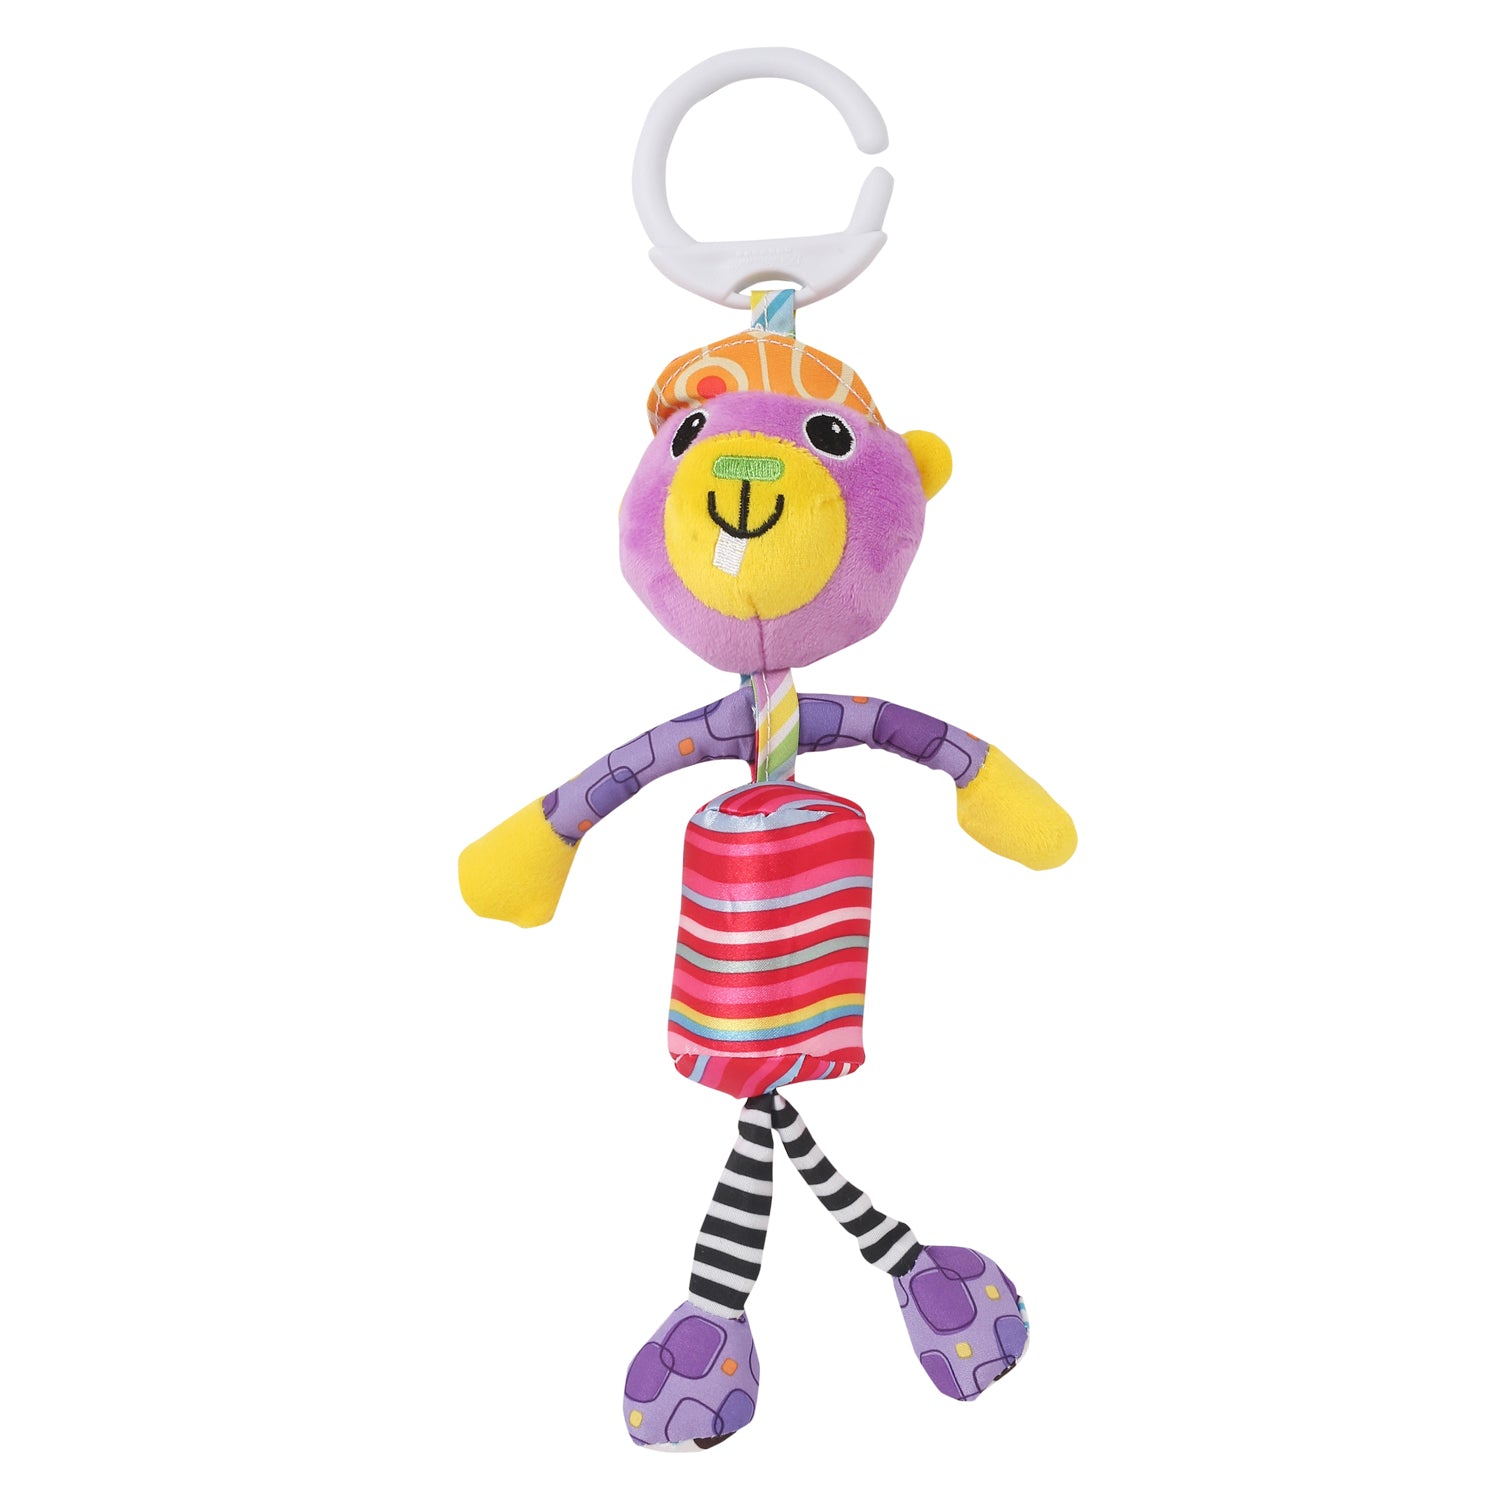 Monkey Purple Hanging Musical Toy / Wind Chime Soft Rattle - Baby Moo